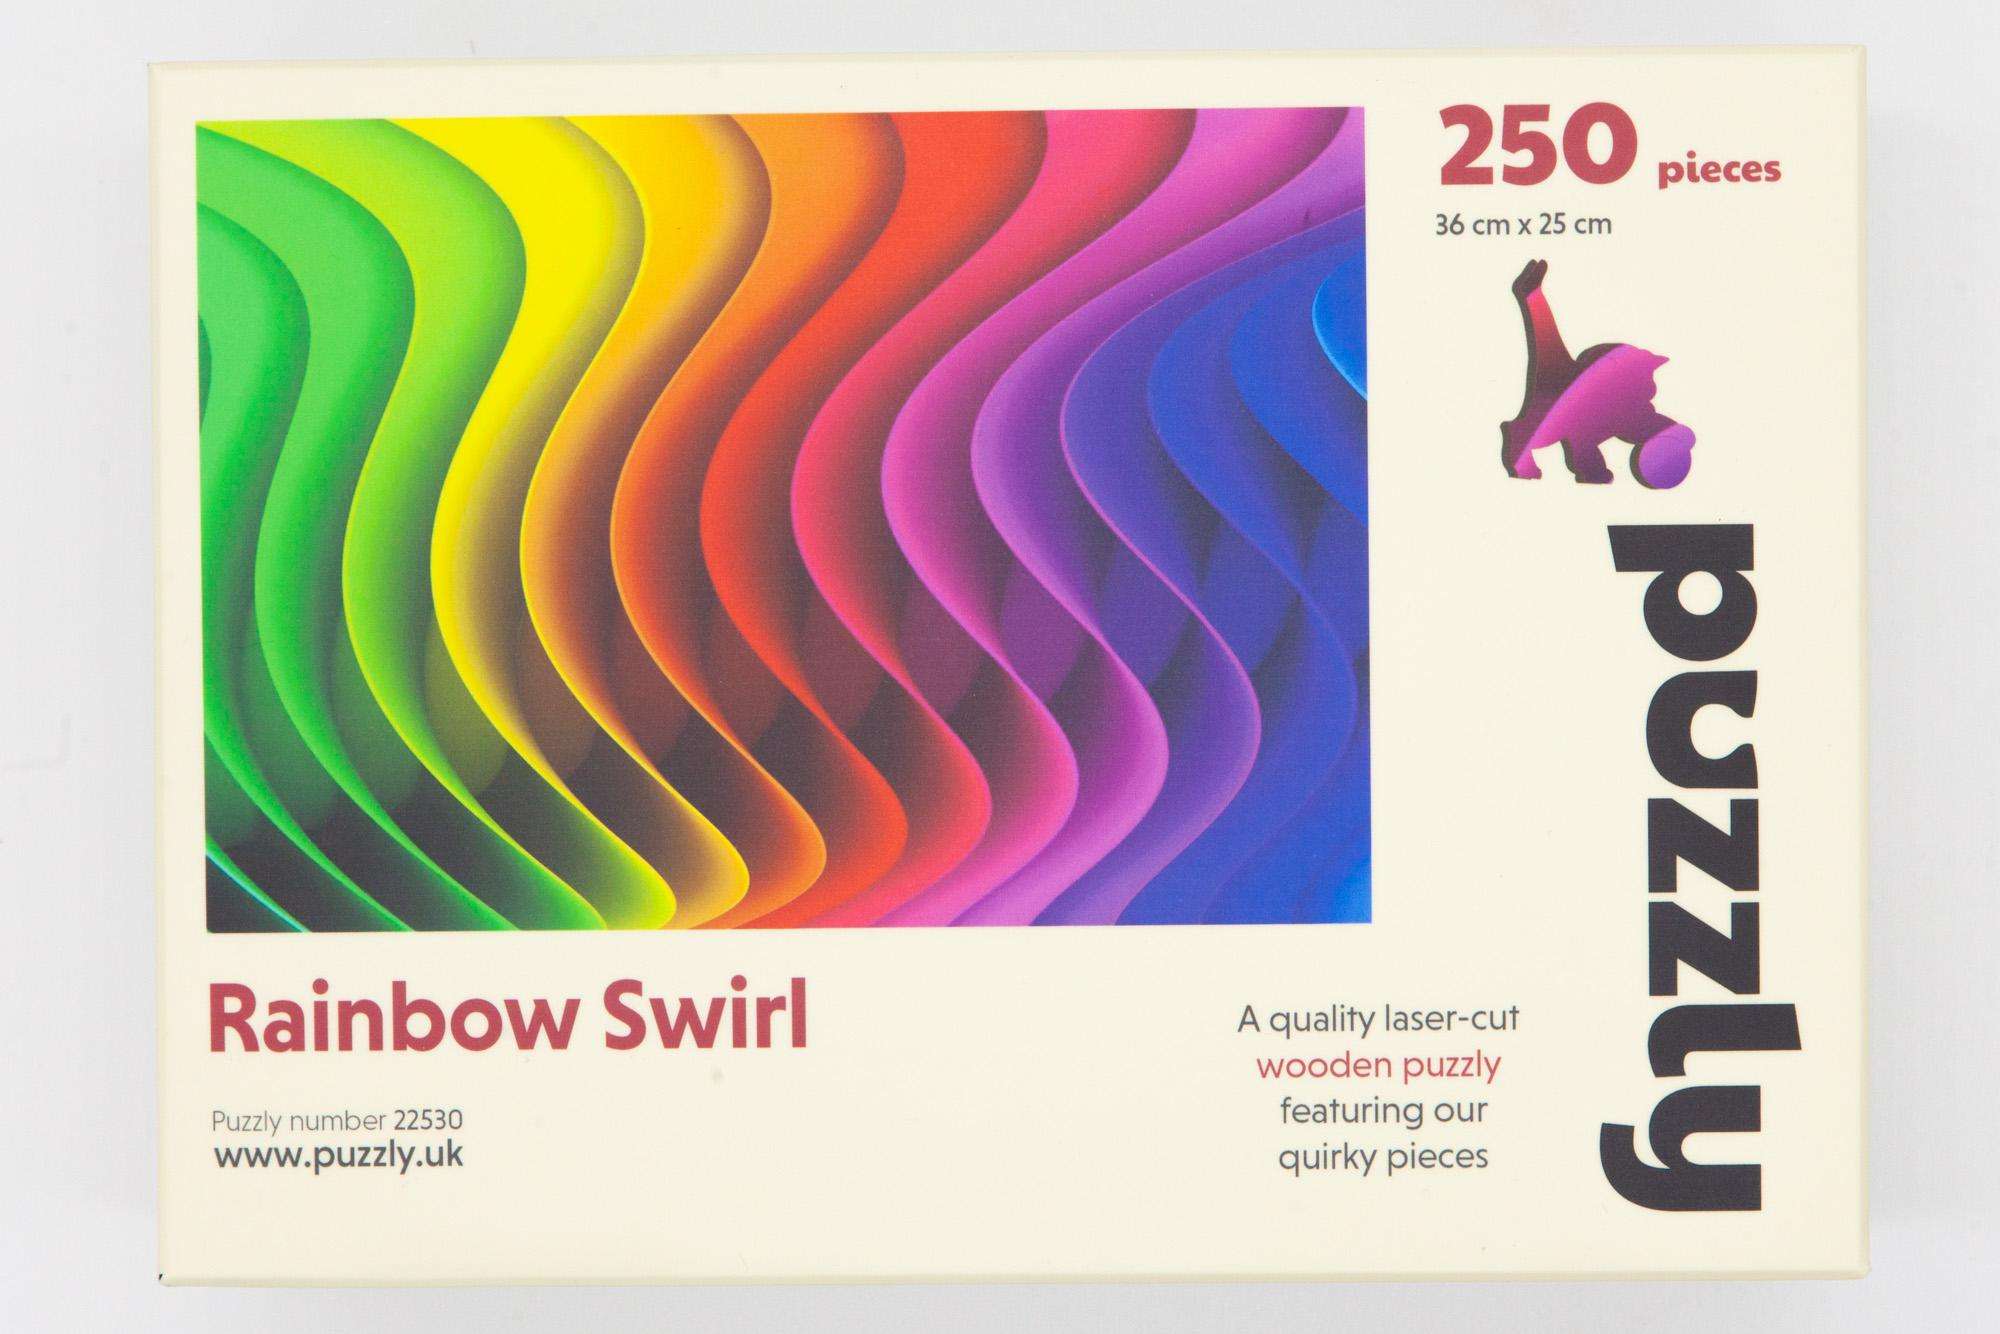 Rainbow Swirl Wooden Puzzle From The Puzzly Company